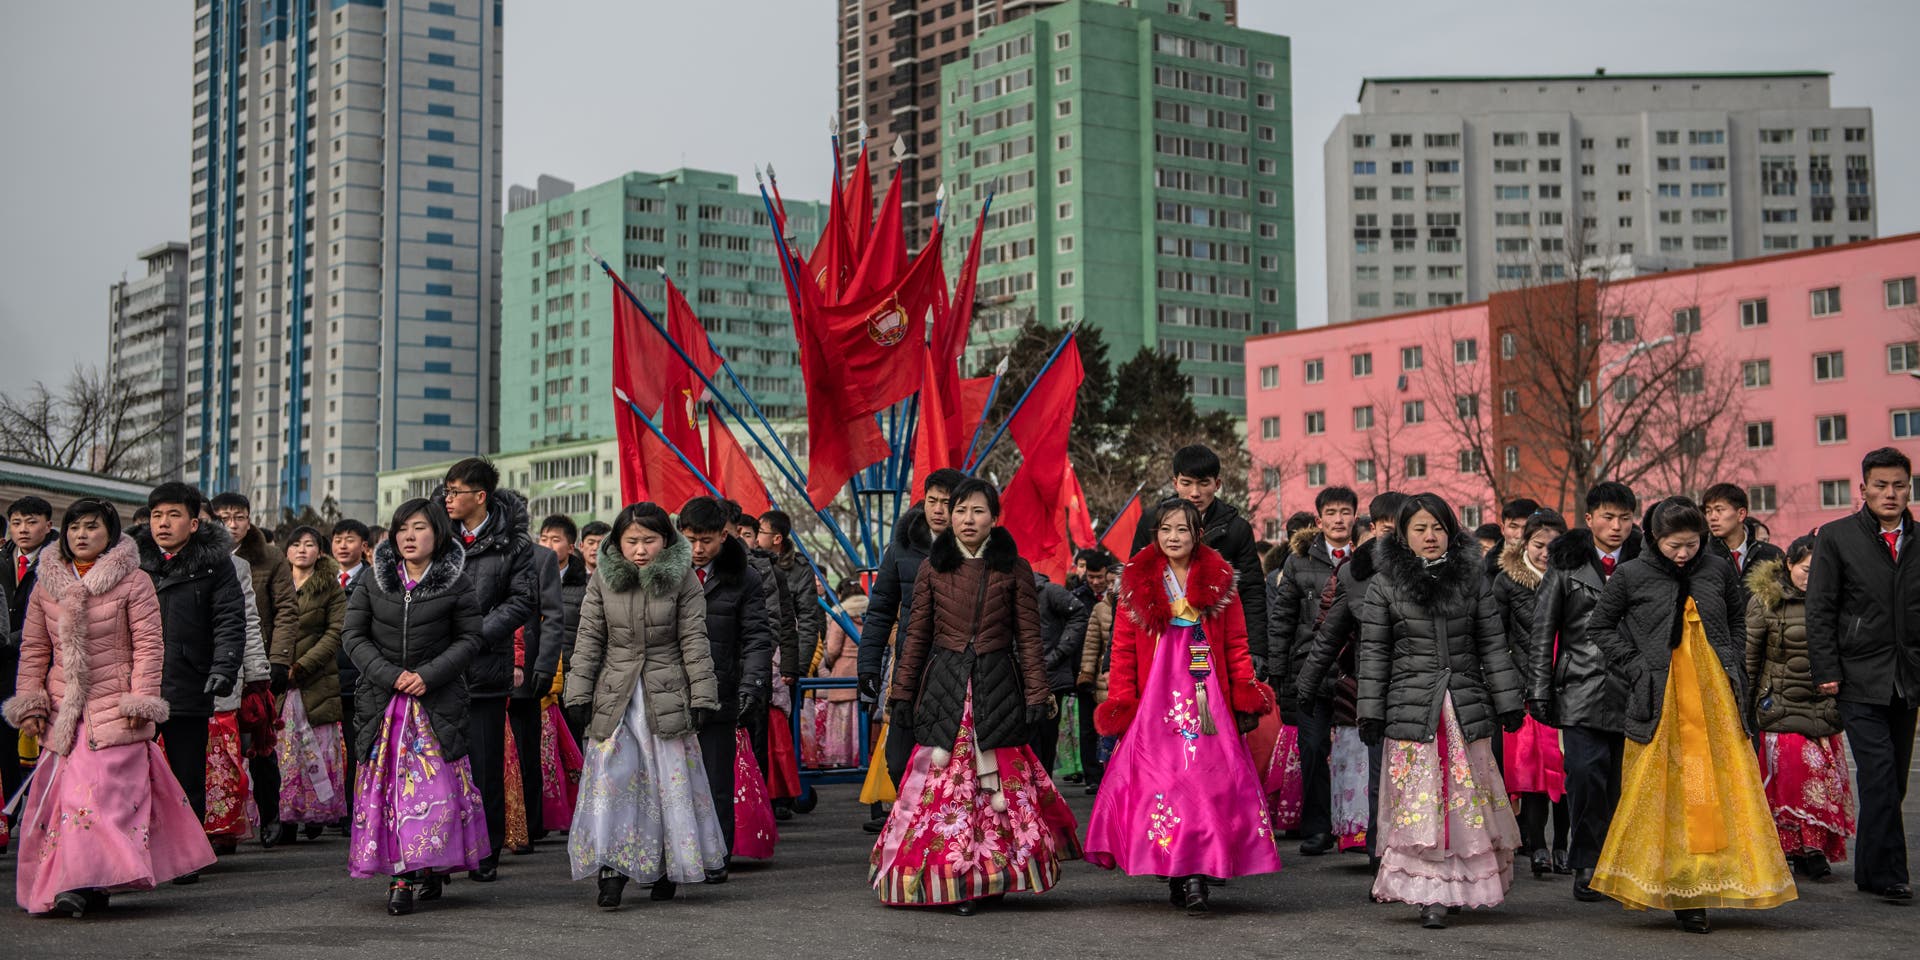 Daily Life In North Korea PYONGYANG, NORTH KOREA - FEBRUARY 08: North Koreans, including women in traditional Korean hanbok dresses, prepare to take part in a mass dance to mark the 71st anniversary of the Korean Peoples Army on February 08, 2019 in Pyongyang, North Korea. U.S President Donald Trump and North Korean Supreme Leader Kim Jong Un will hold a second summit in the Vietnamese capital of Hanoi later this month following a historic summit in Singapore last June. Although the two countries remain technically at war and with negotiations surrounding the details of North Korea's nuclear disarmament continuing, President Trump has hailed Kim Jong Un and North Korea with a tweet in which he predicted that the country would become "a great economic powerhouse" thanks to Mr Kim's leadership. (Photo by Carl Court/Getty Images)